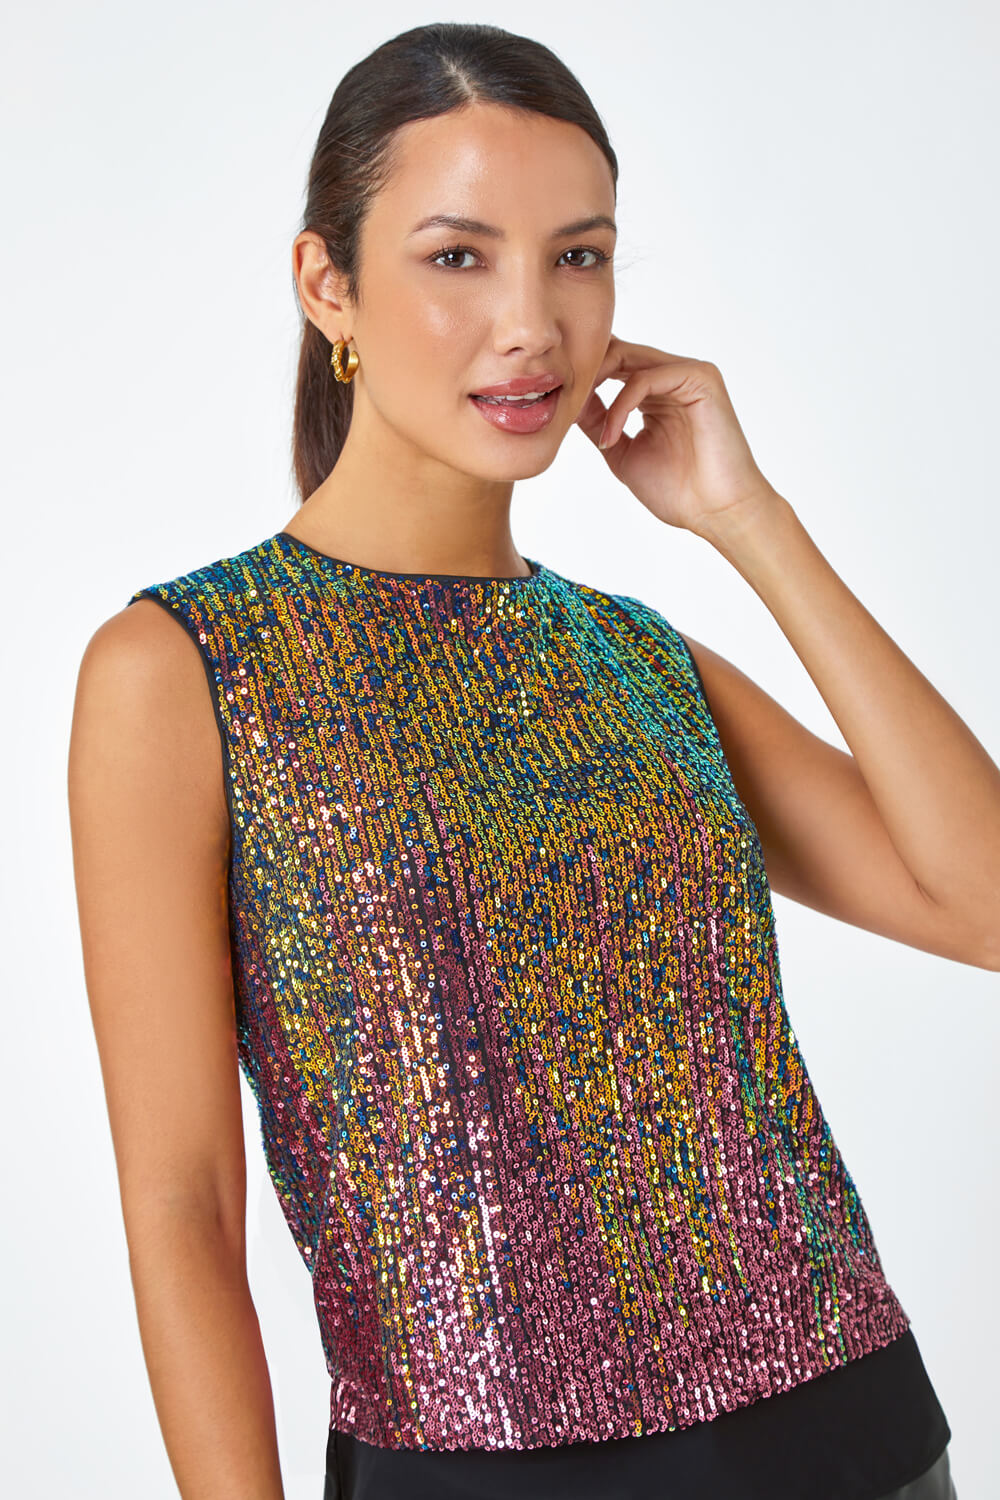 PINK Ombre Sequin Overlay Stretch Top, Image 6 of 7